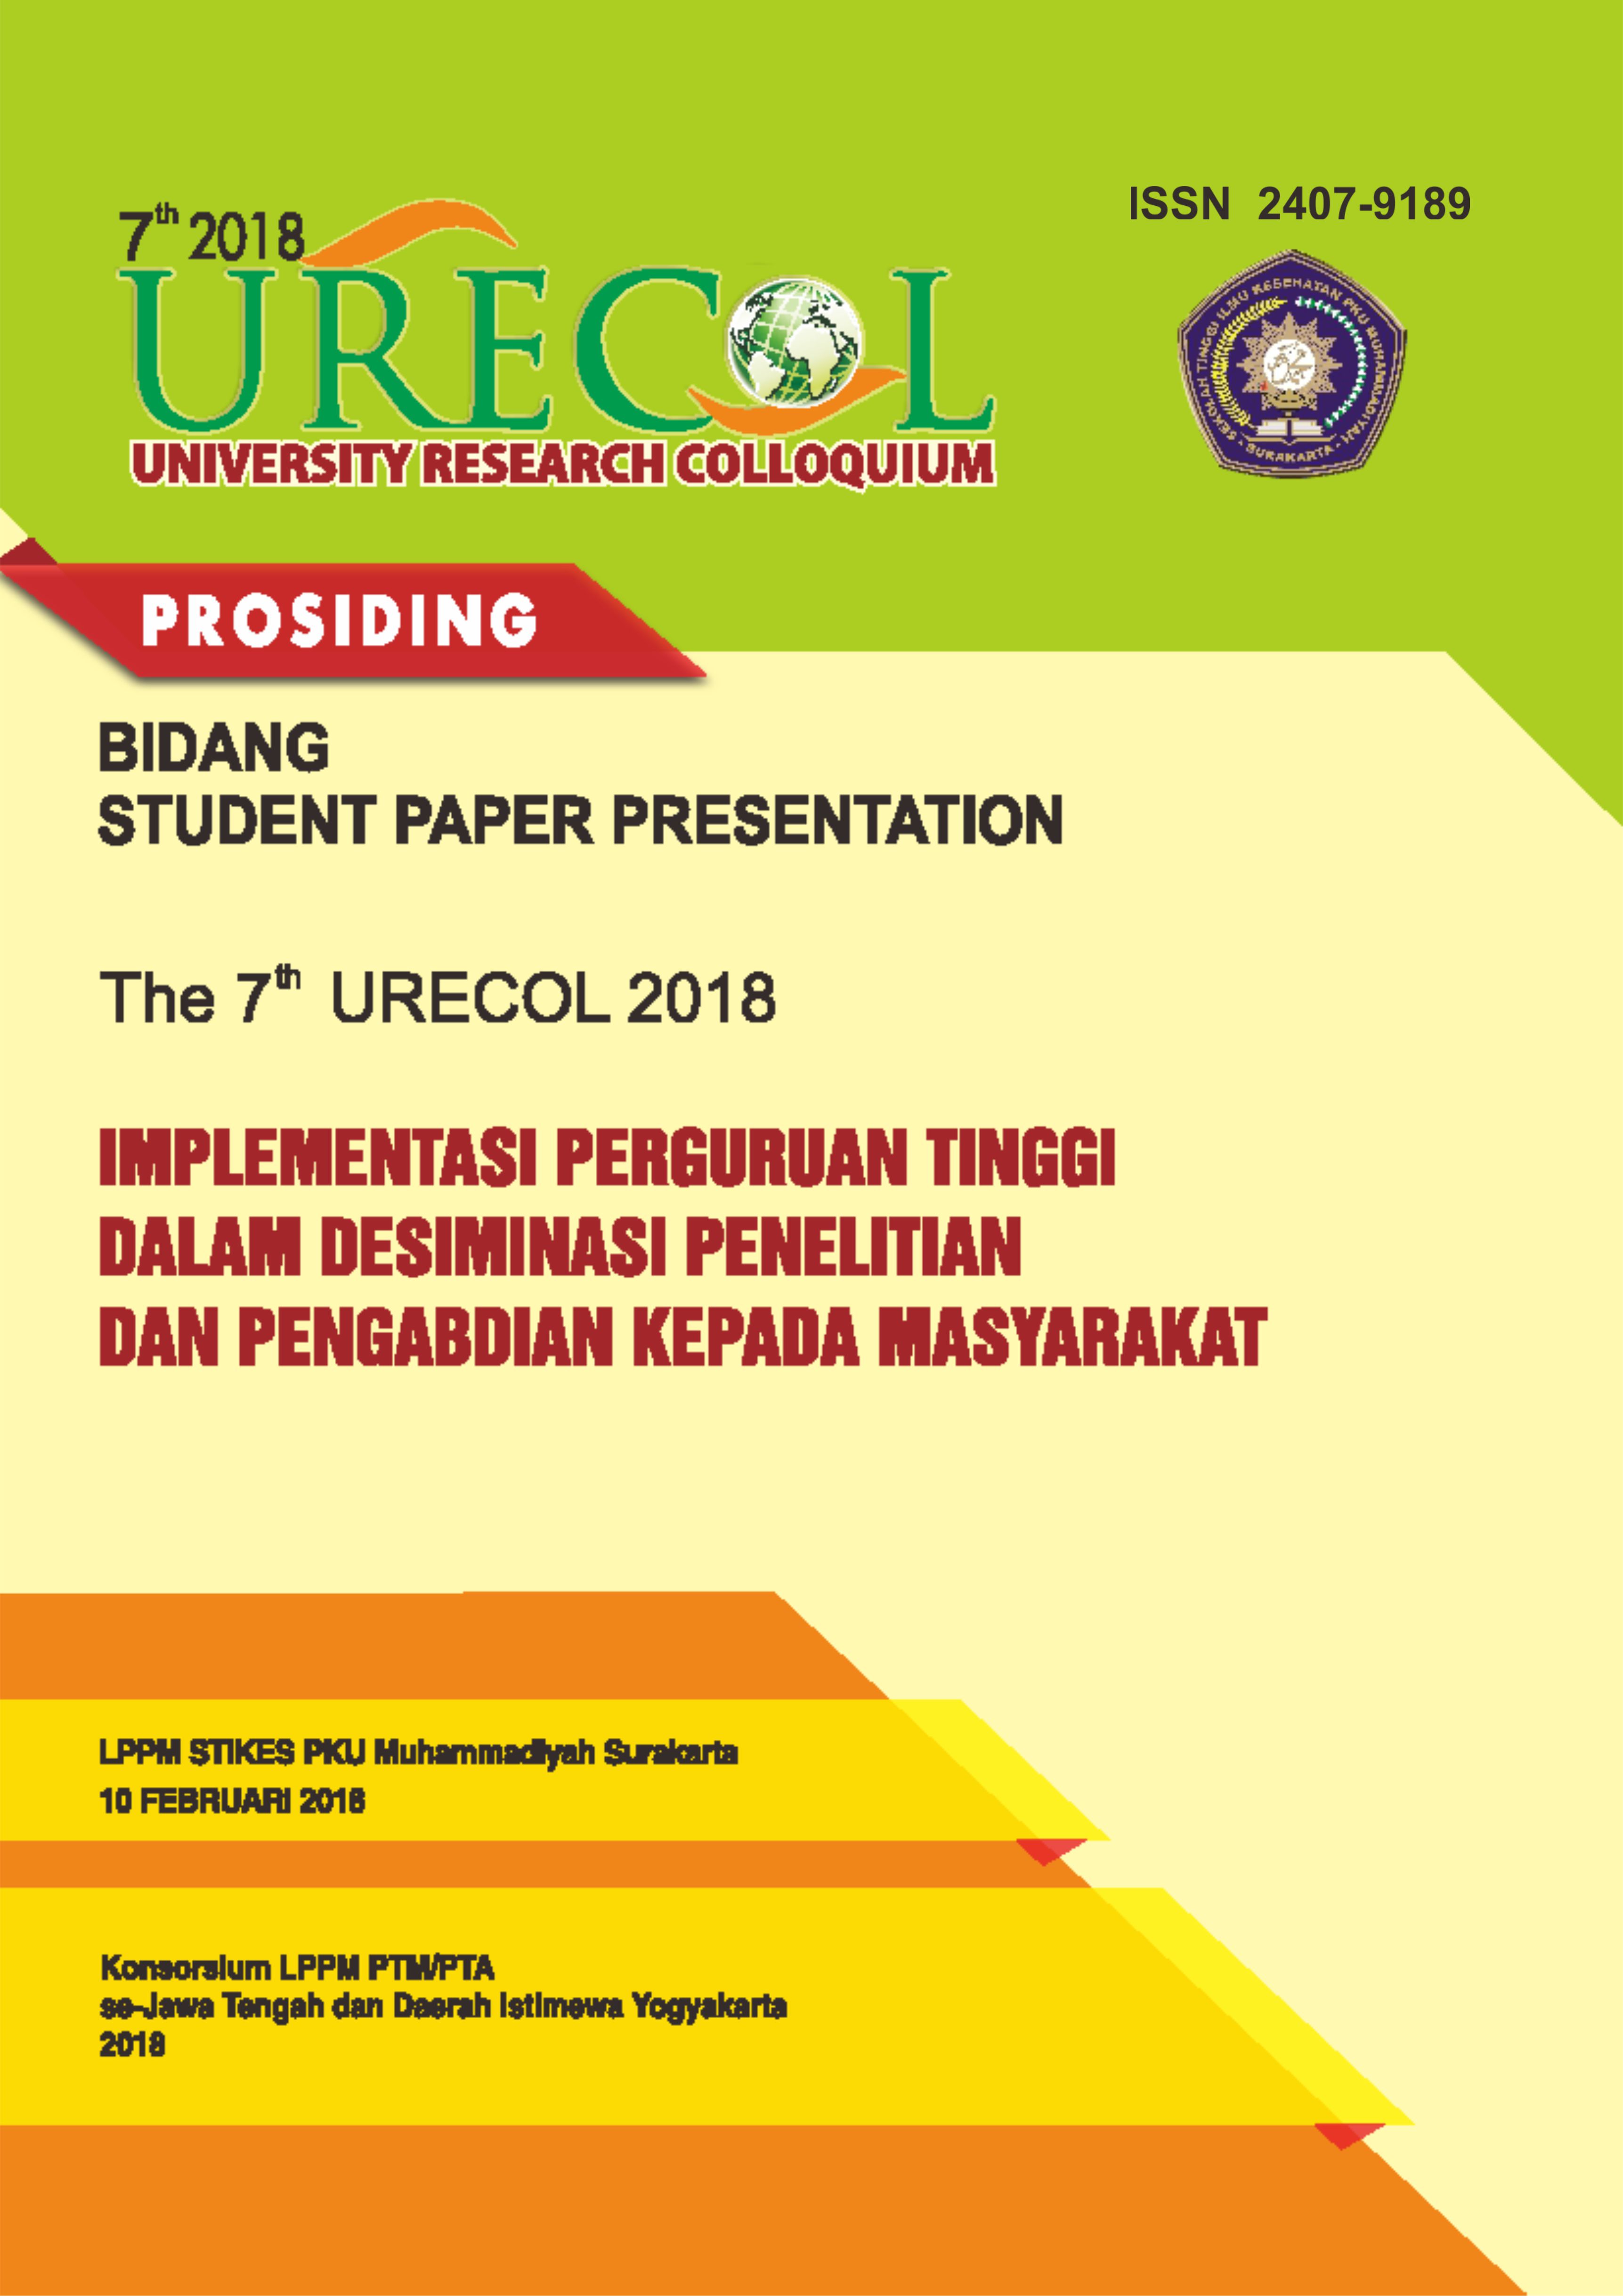 					View Proceeding of The 7th University Research Colloquium 2018: Mahasiswa (student paper presentation)
				